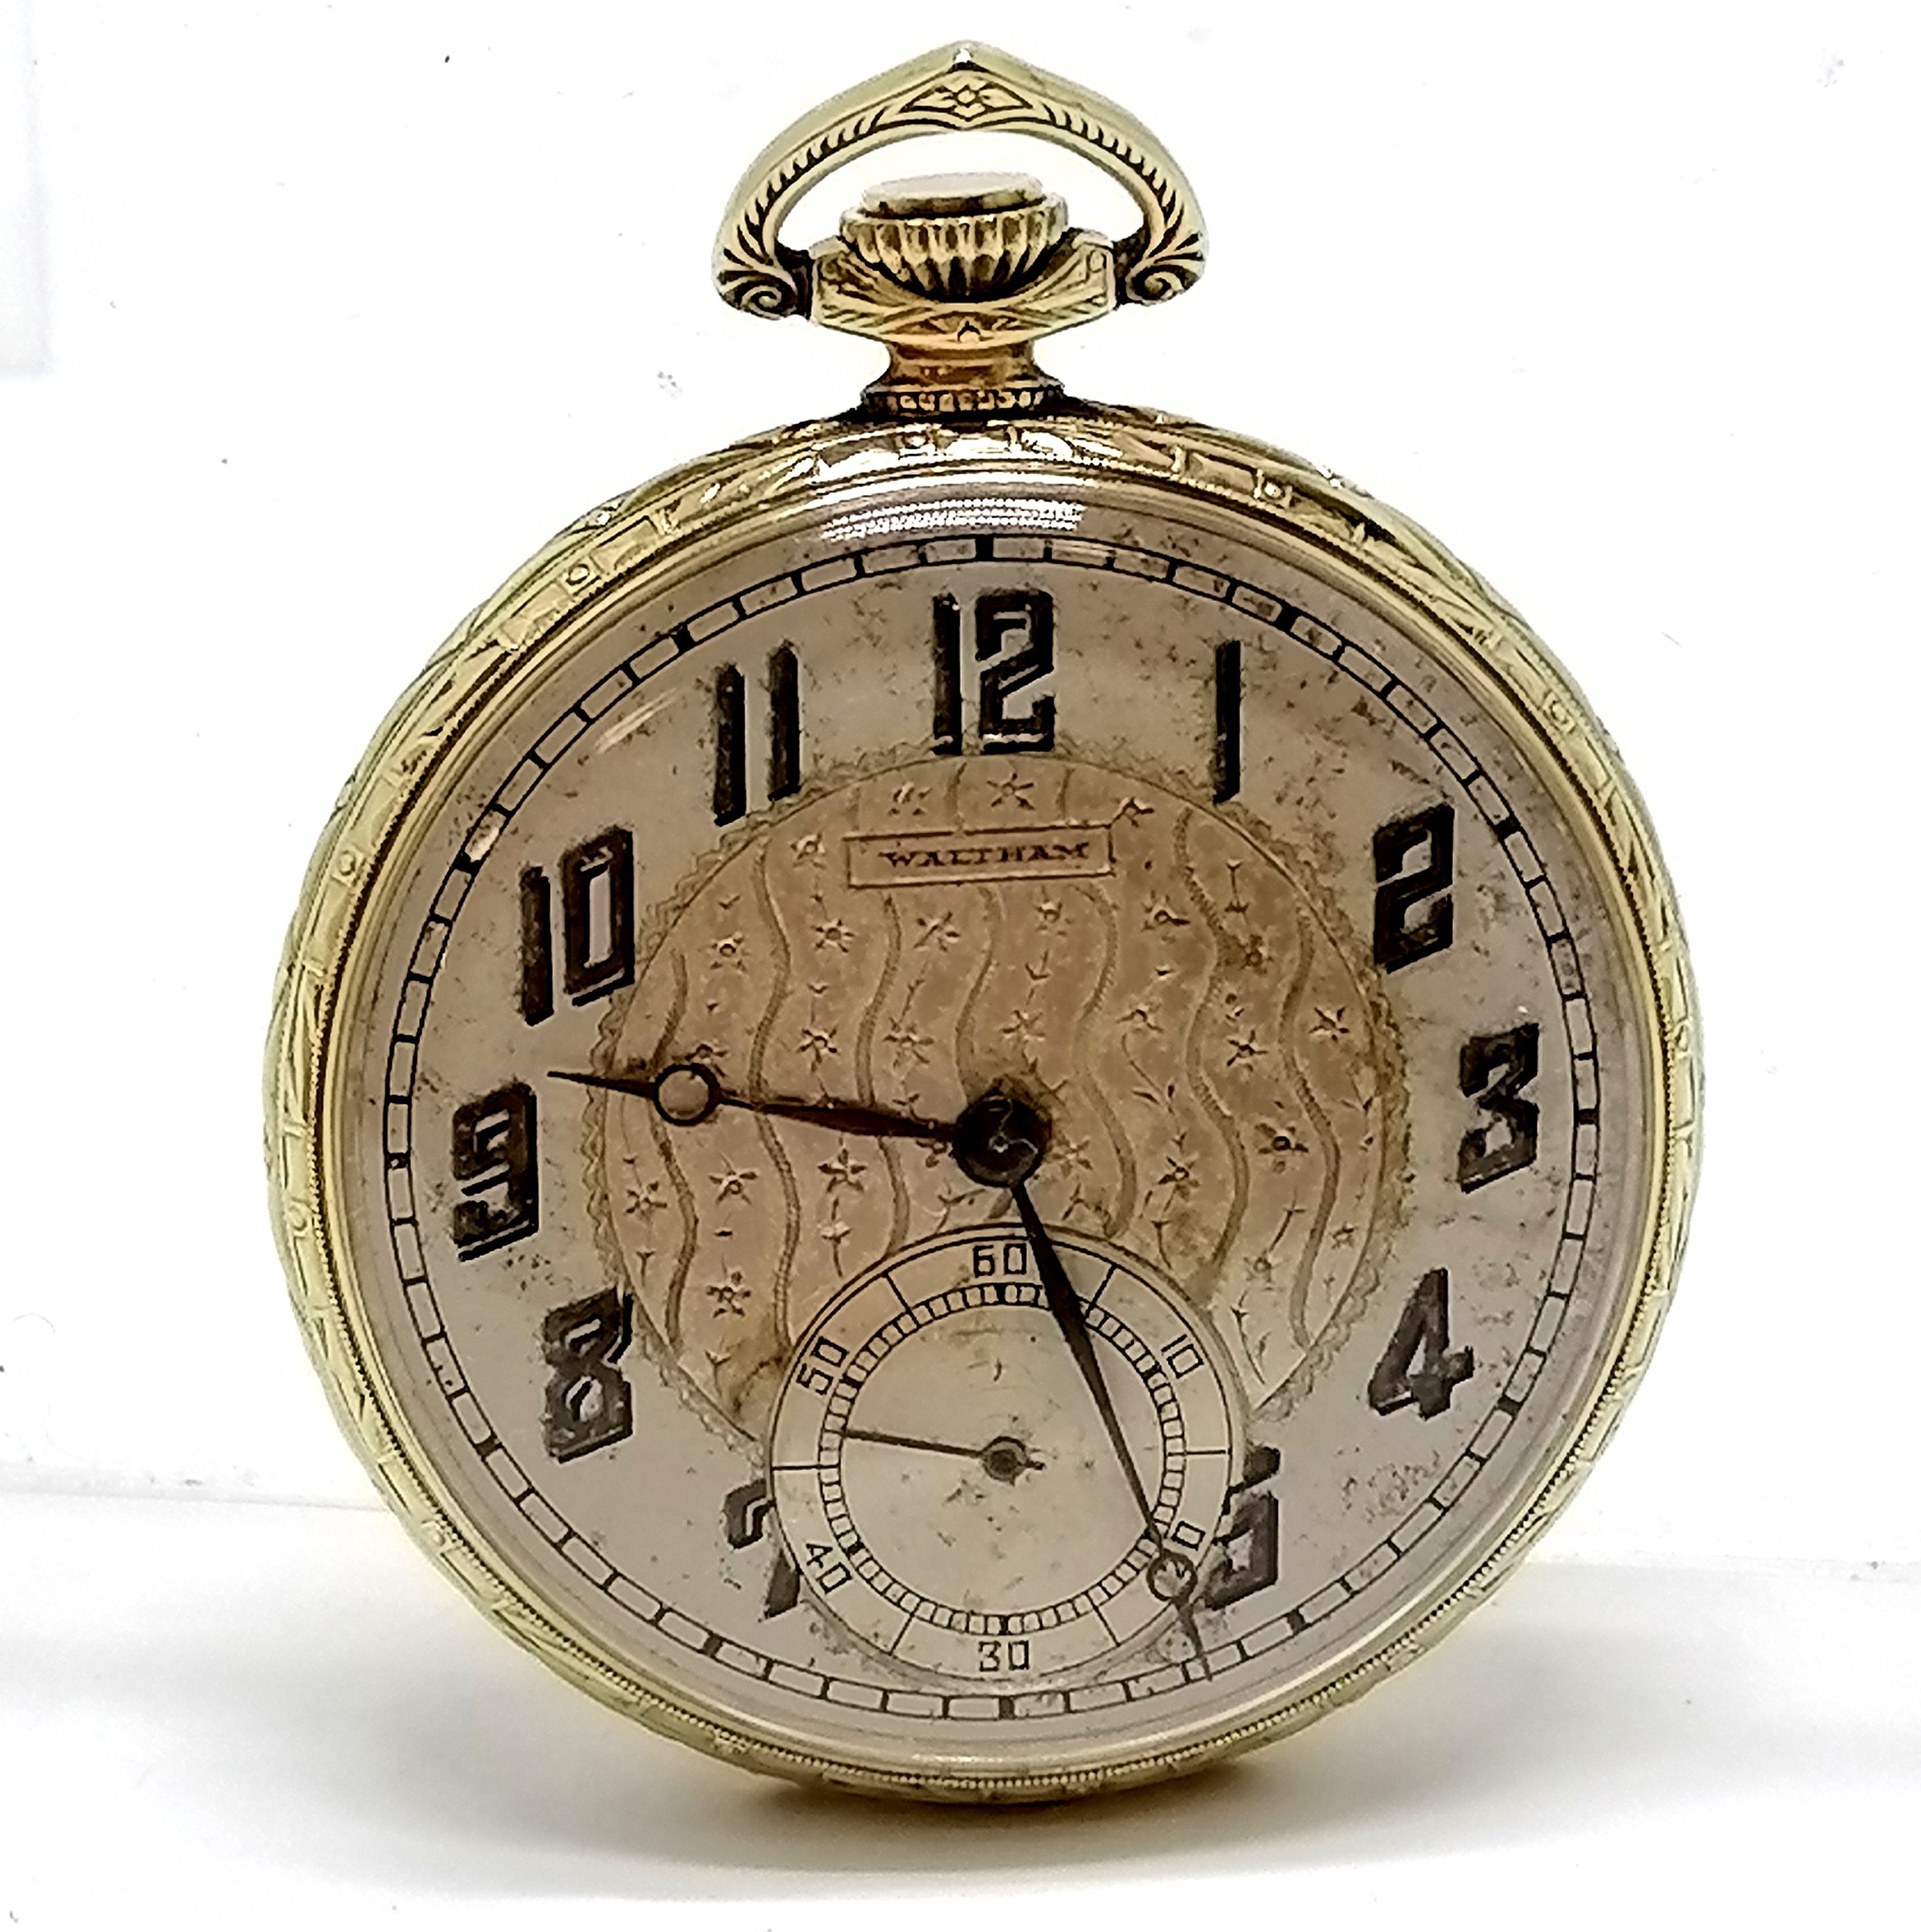 Waltham 14ct gold filled Art Deco pocket watch - 42mm case & some deterioration to dial and otherwis